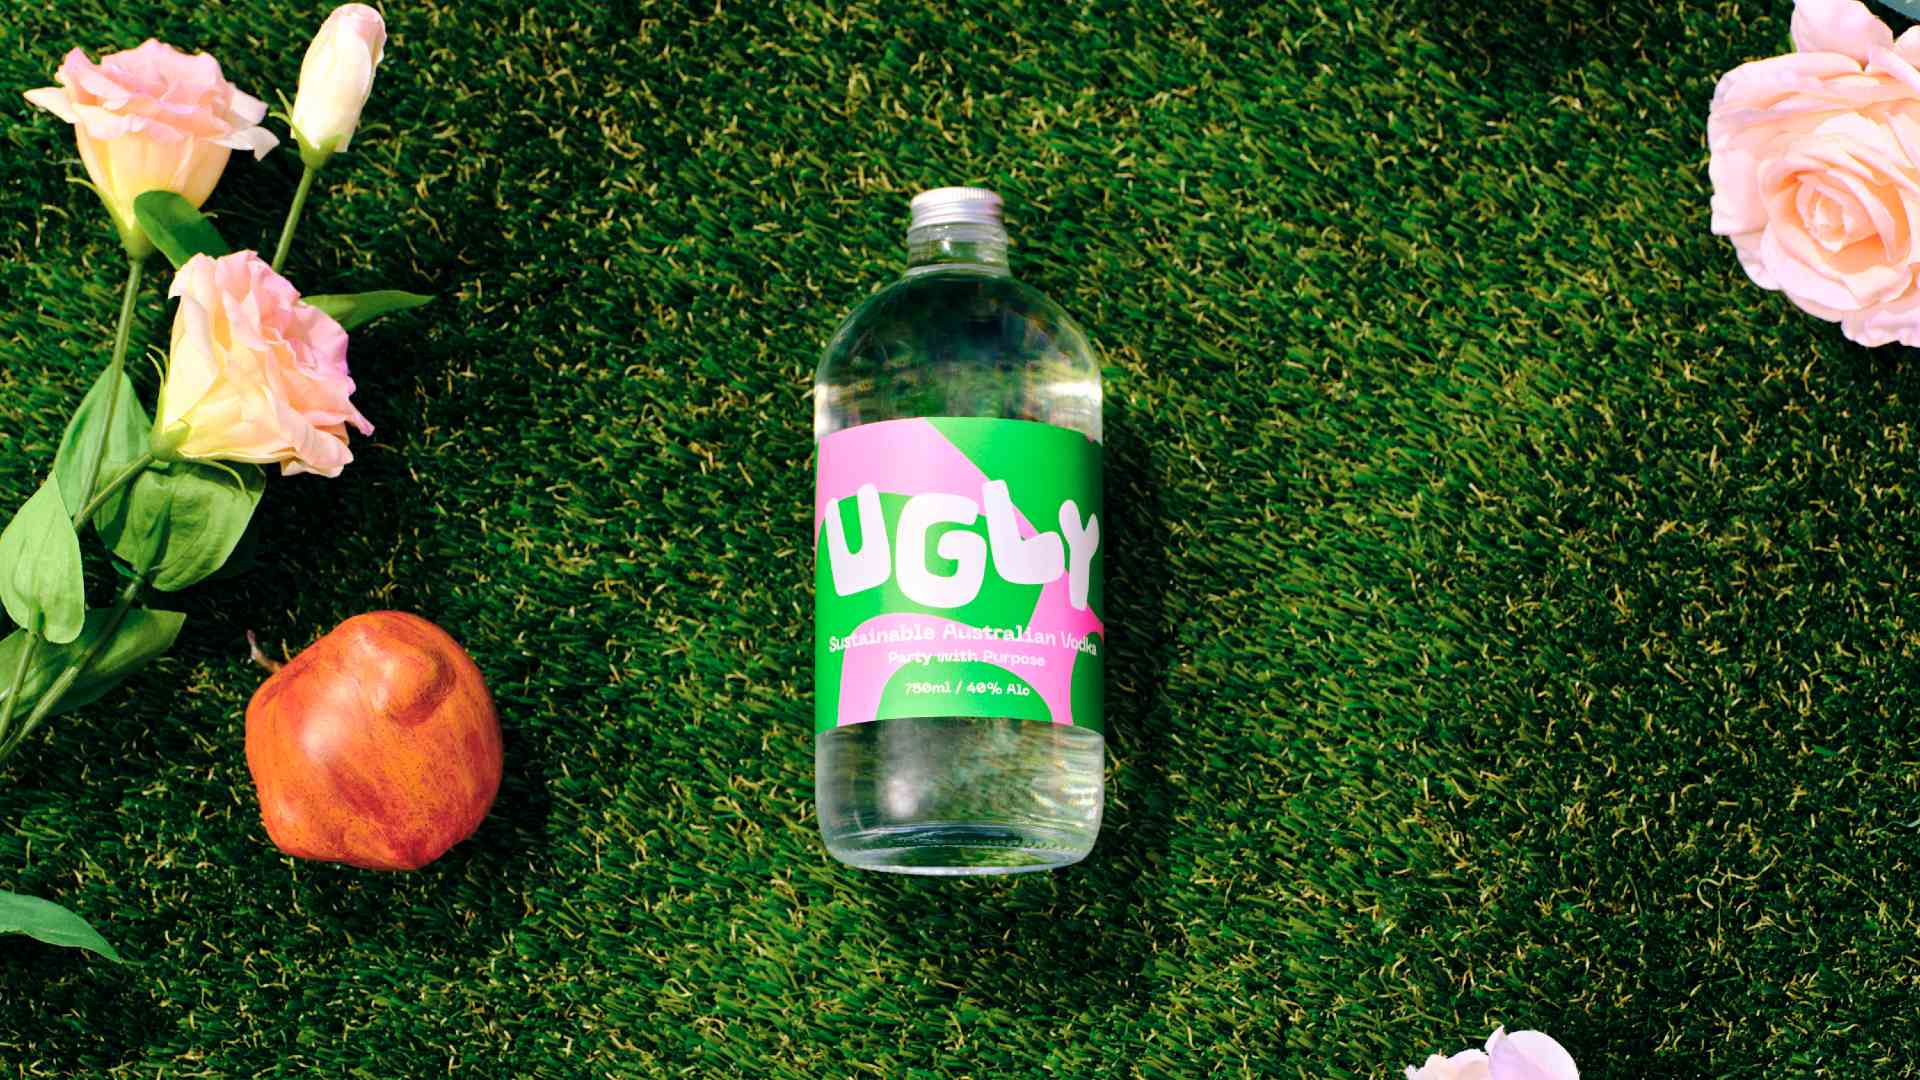 Ugly Vodka Is the Innovative New Booze Brand Turning Imperfect Apples Into a Sustainable Sip